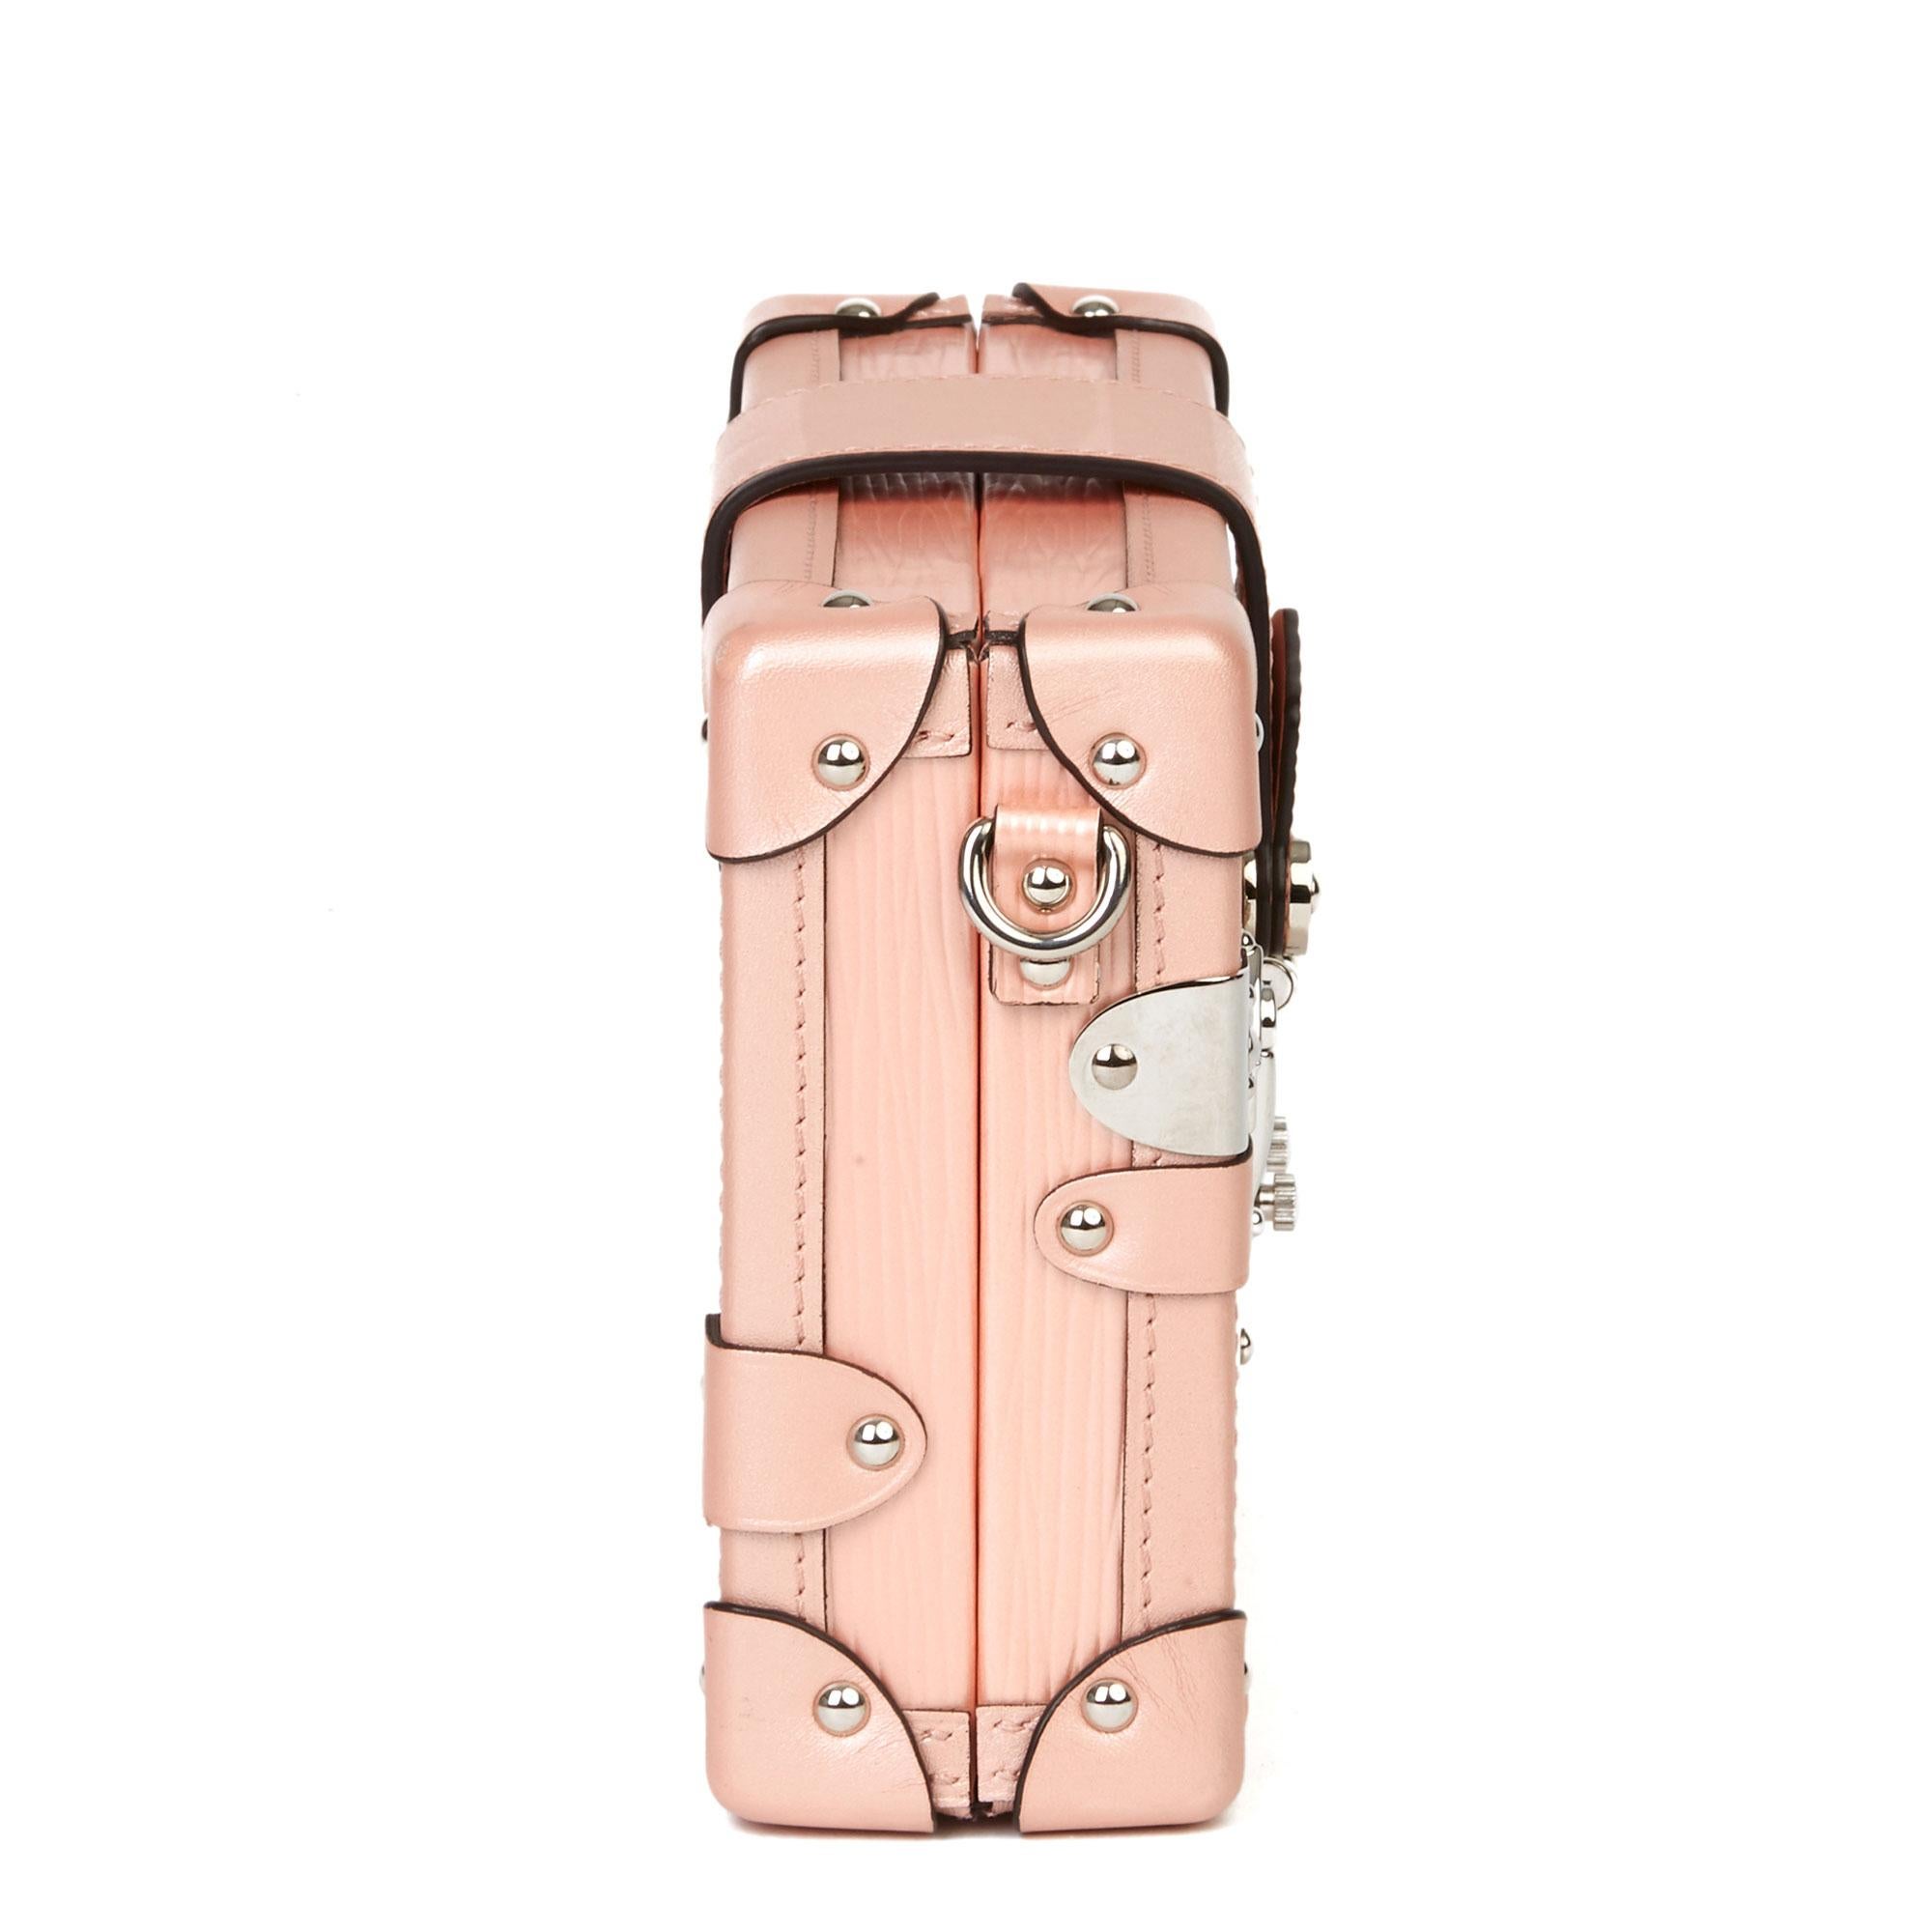 LOUIS VUITTON
Pink Metallic Epi Leather & Calfskin Petite Malle

Xupes Reference: HB3629
Serial Number: FL3105
Age (Circa): 2015
Accompanied By: Louis Vuitton Dust Bag, Shoulder Strap
Authenticity Details: Date Stamp (Made in France)
Gender: